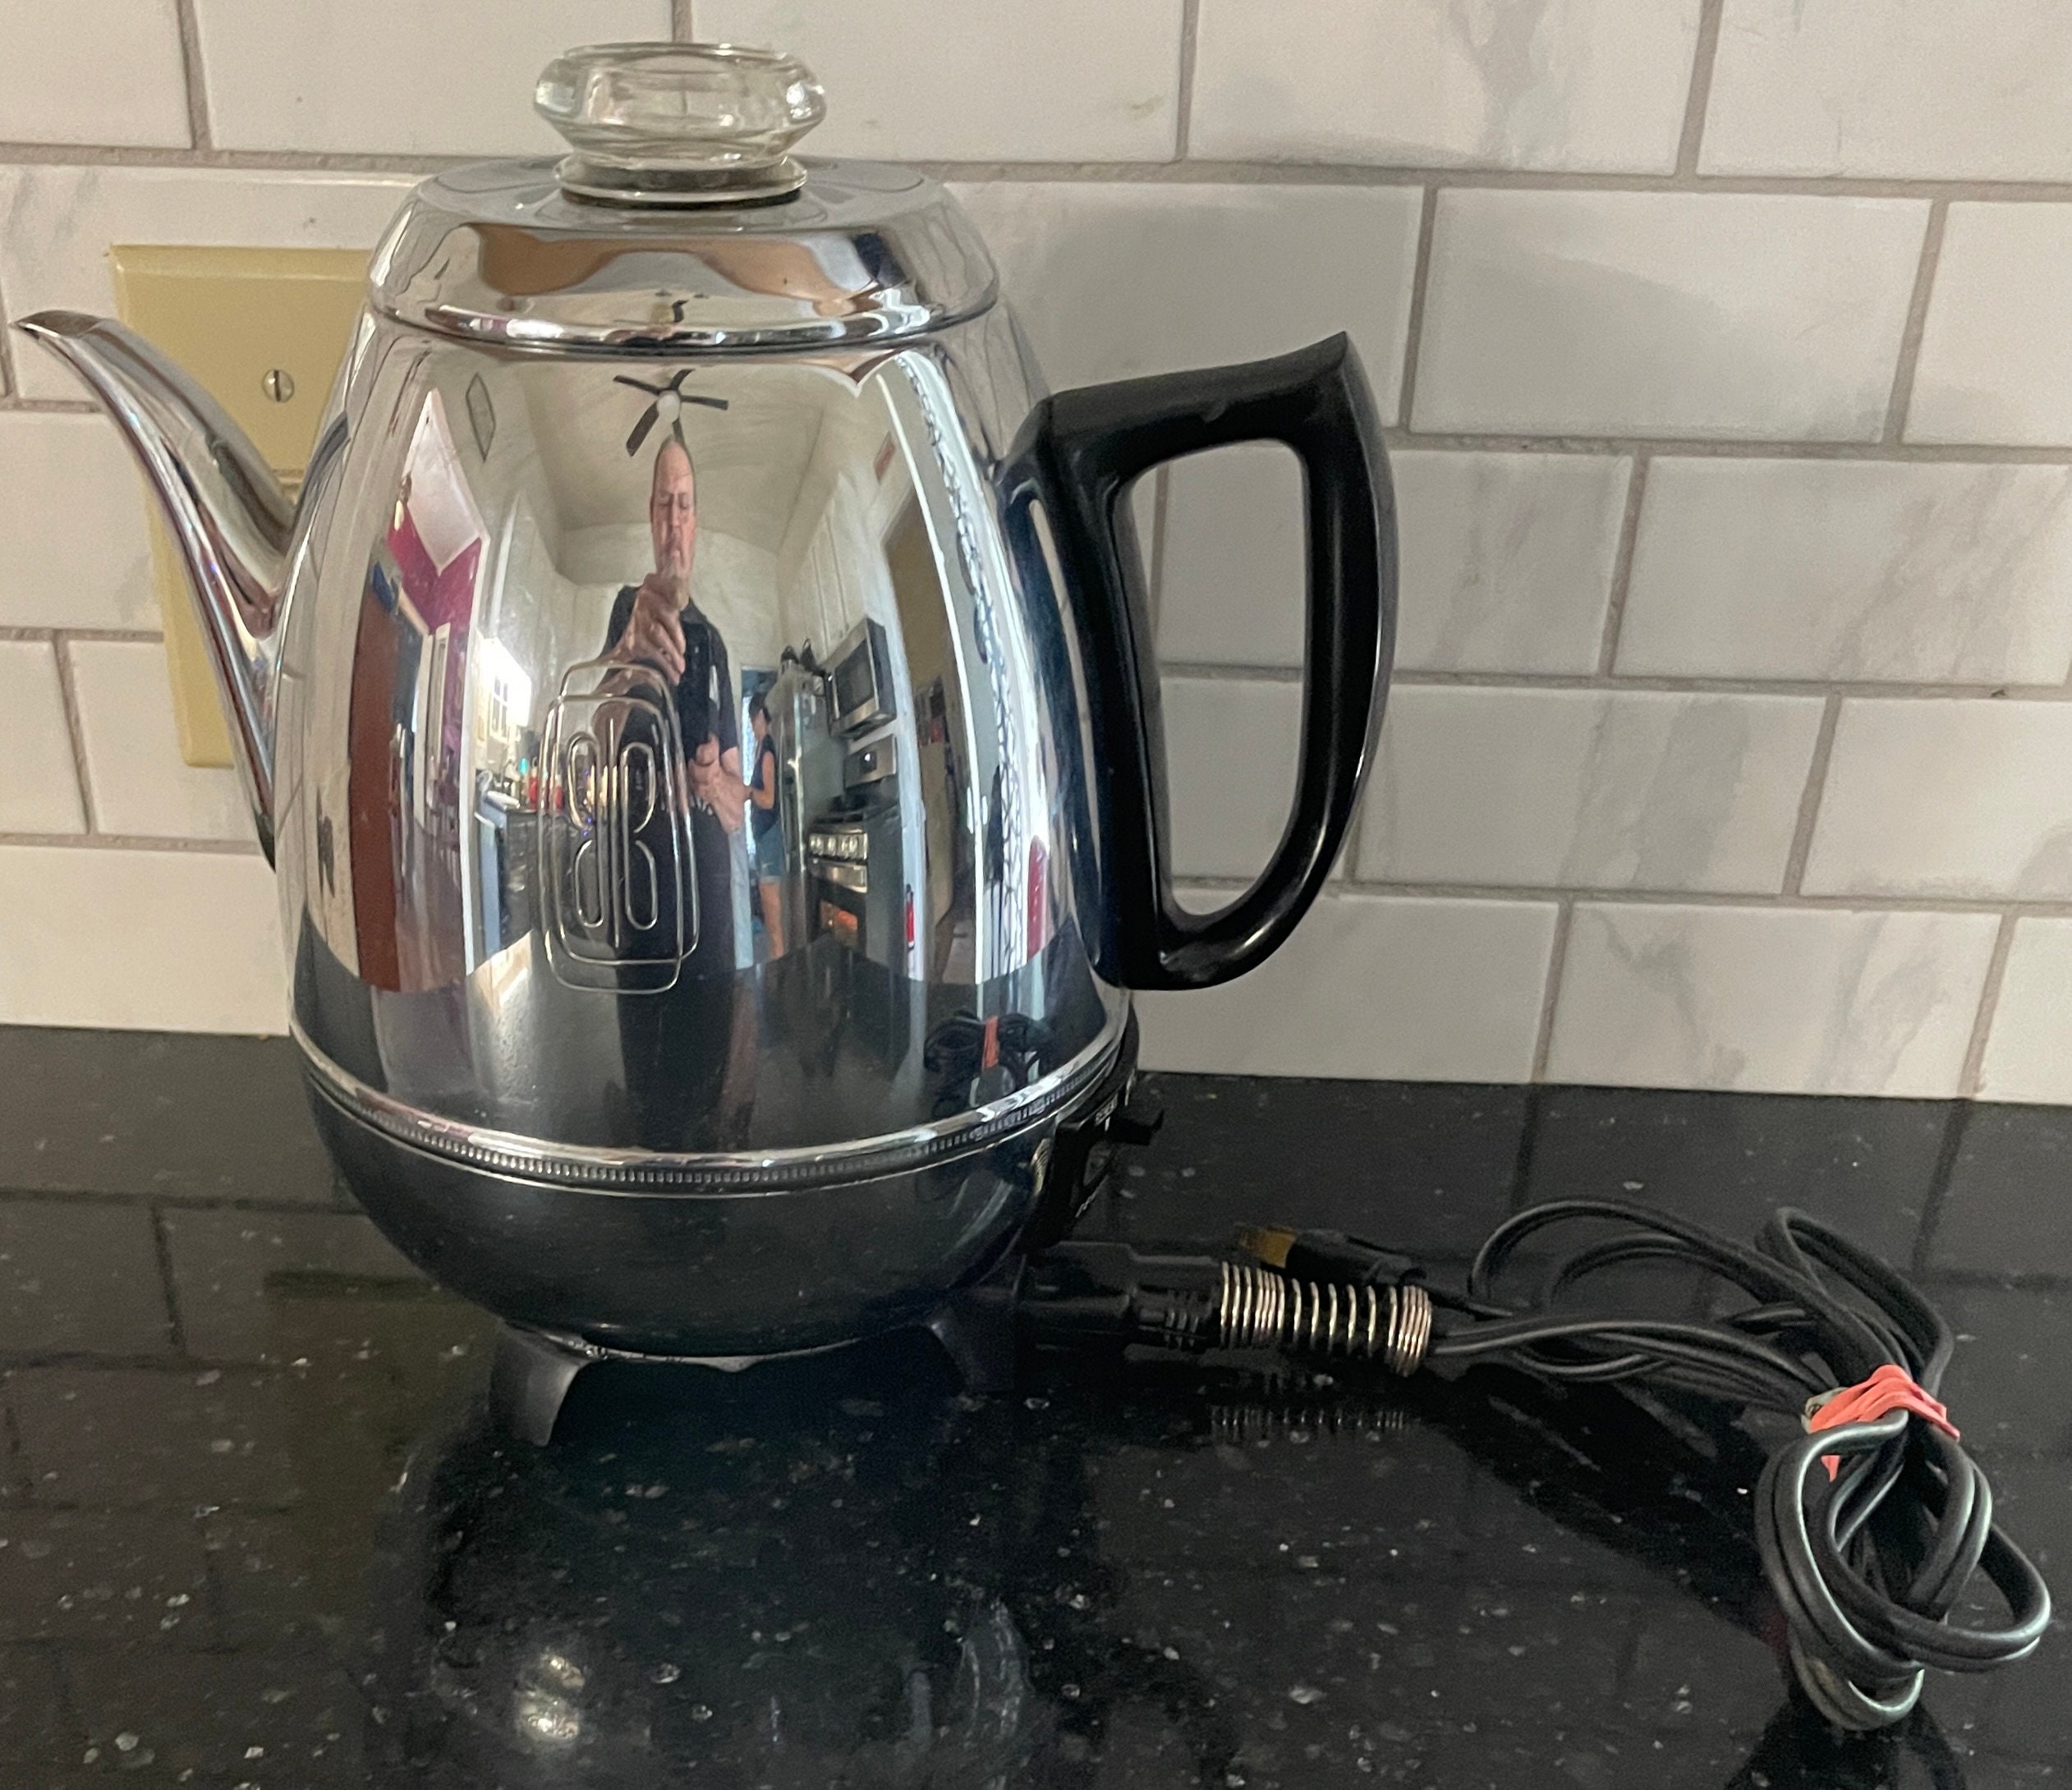 Copco Stove Top Percolator Coffee Pot 8 Cup Stainless Steel Mid Century  Vintage 50s 60s Glass Perk Top 